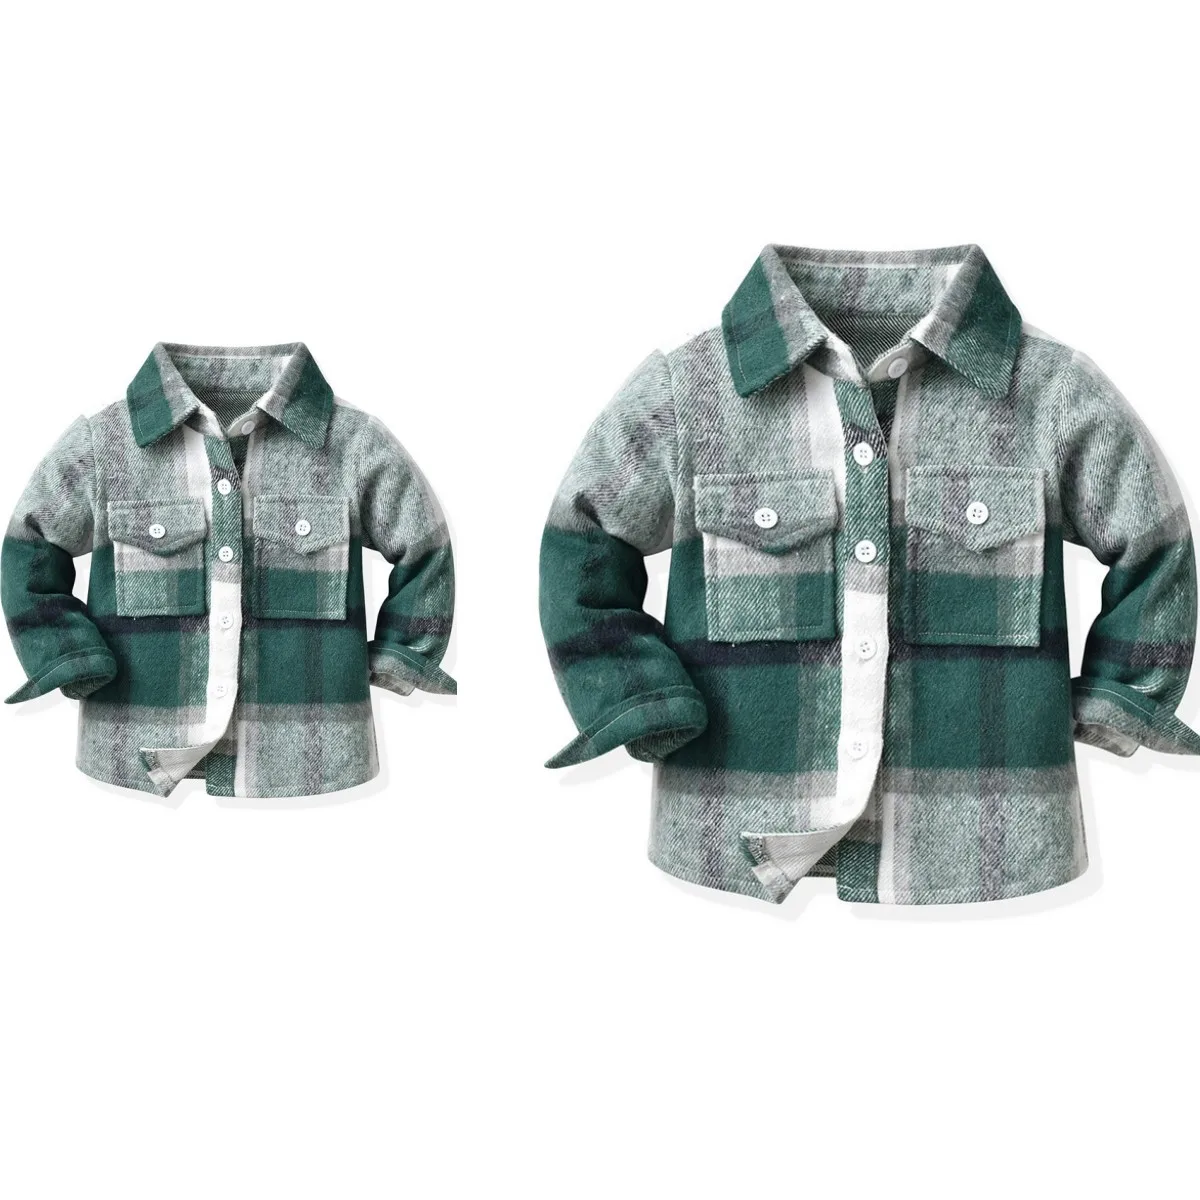 Green Christmas Family Matching Plaid Jacket Long Shirts Mom Dad and Me Boy GIrl Outwear Coat Woman Sisters Brothers Sweatshirt